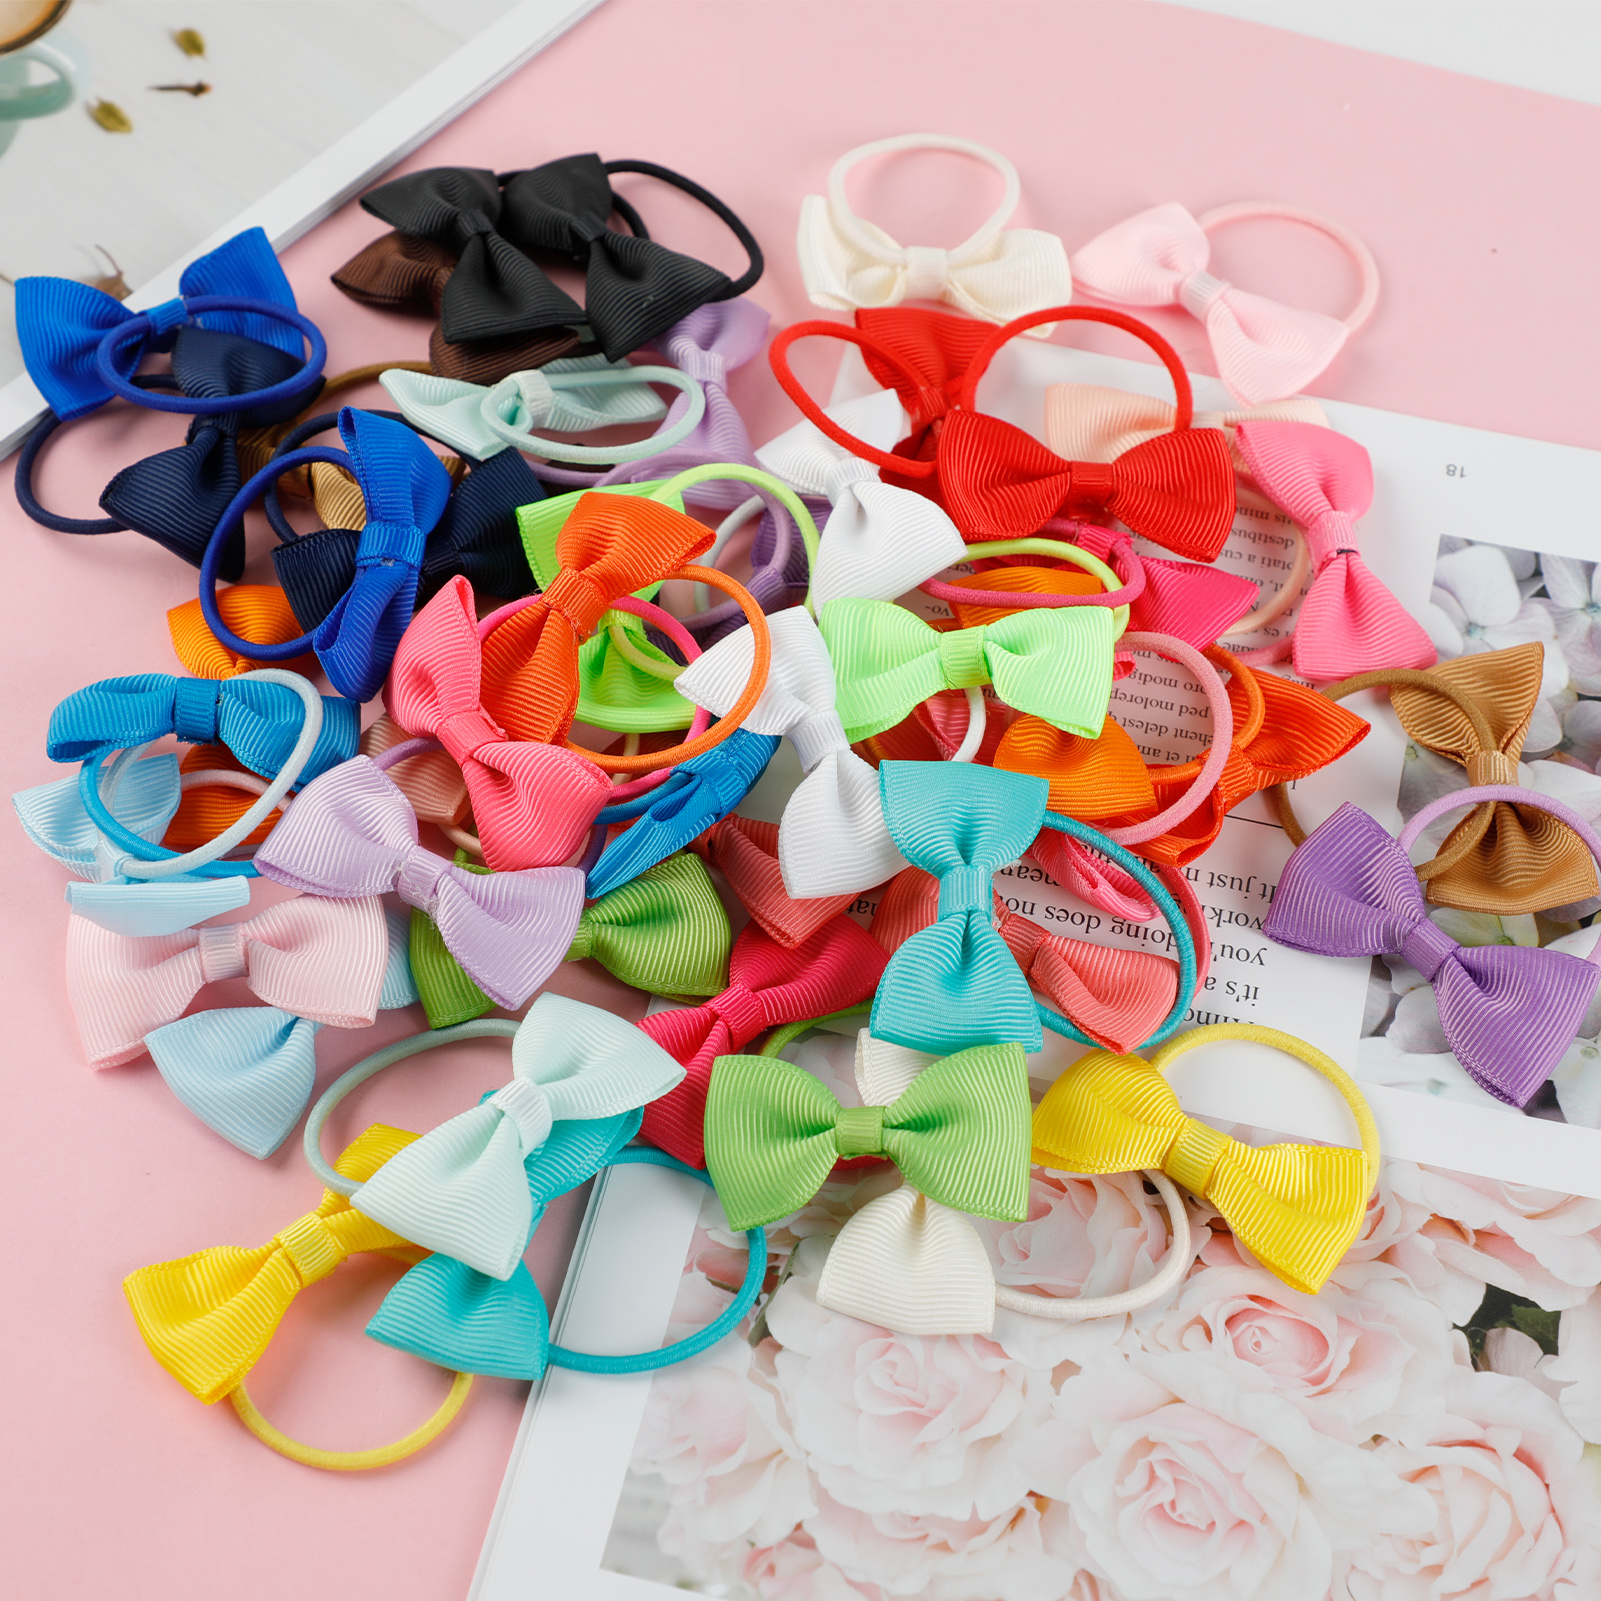 Peaoy 50PCS Baby Hair Ties with Bows for Infants Toddler Girls Grosgrain Ribbon Rubber Bands Elastic Ponytail Holders 2 Inch - image 2 of 9